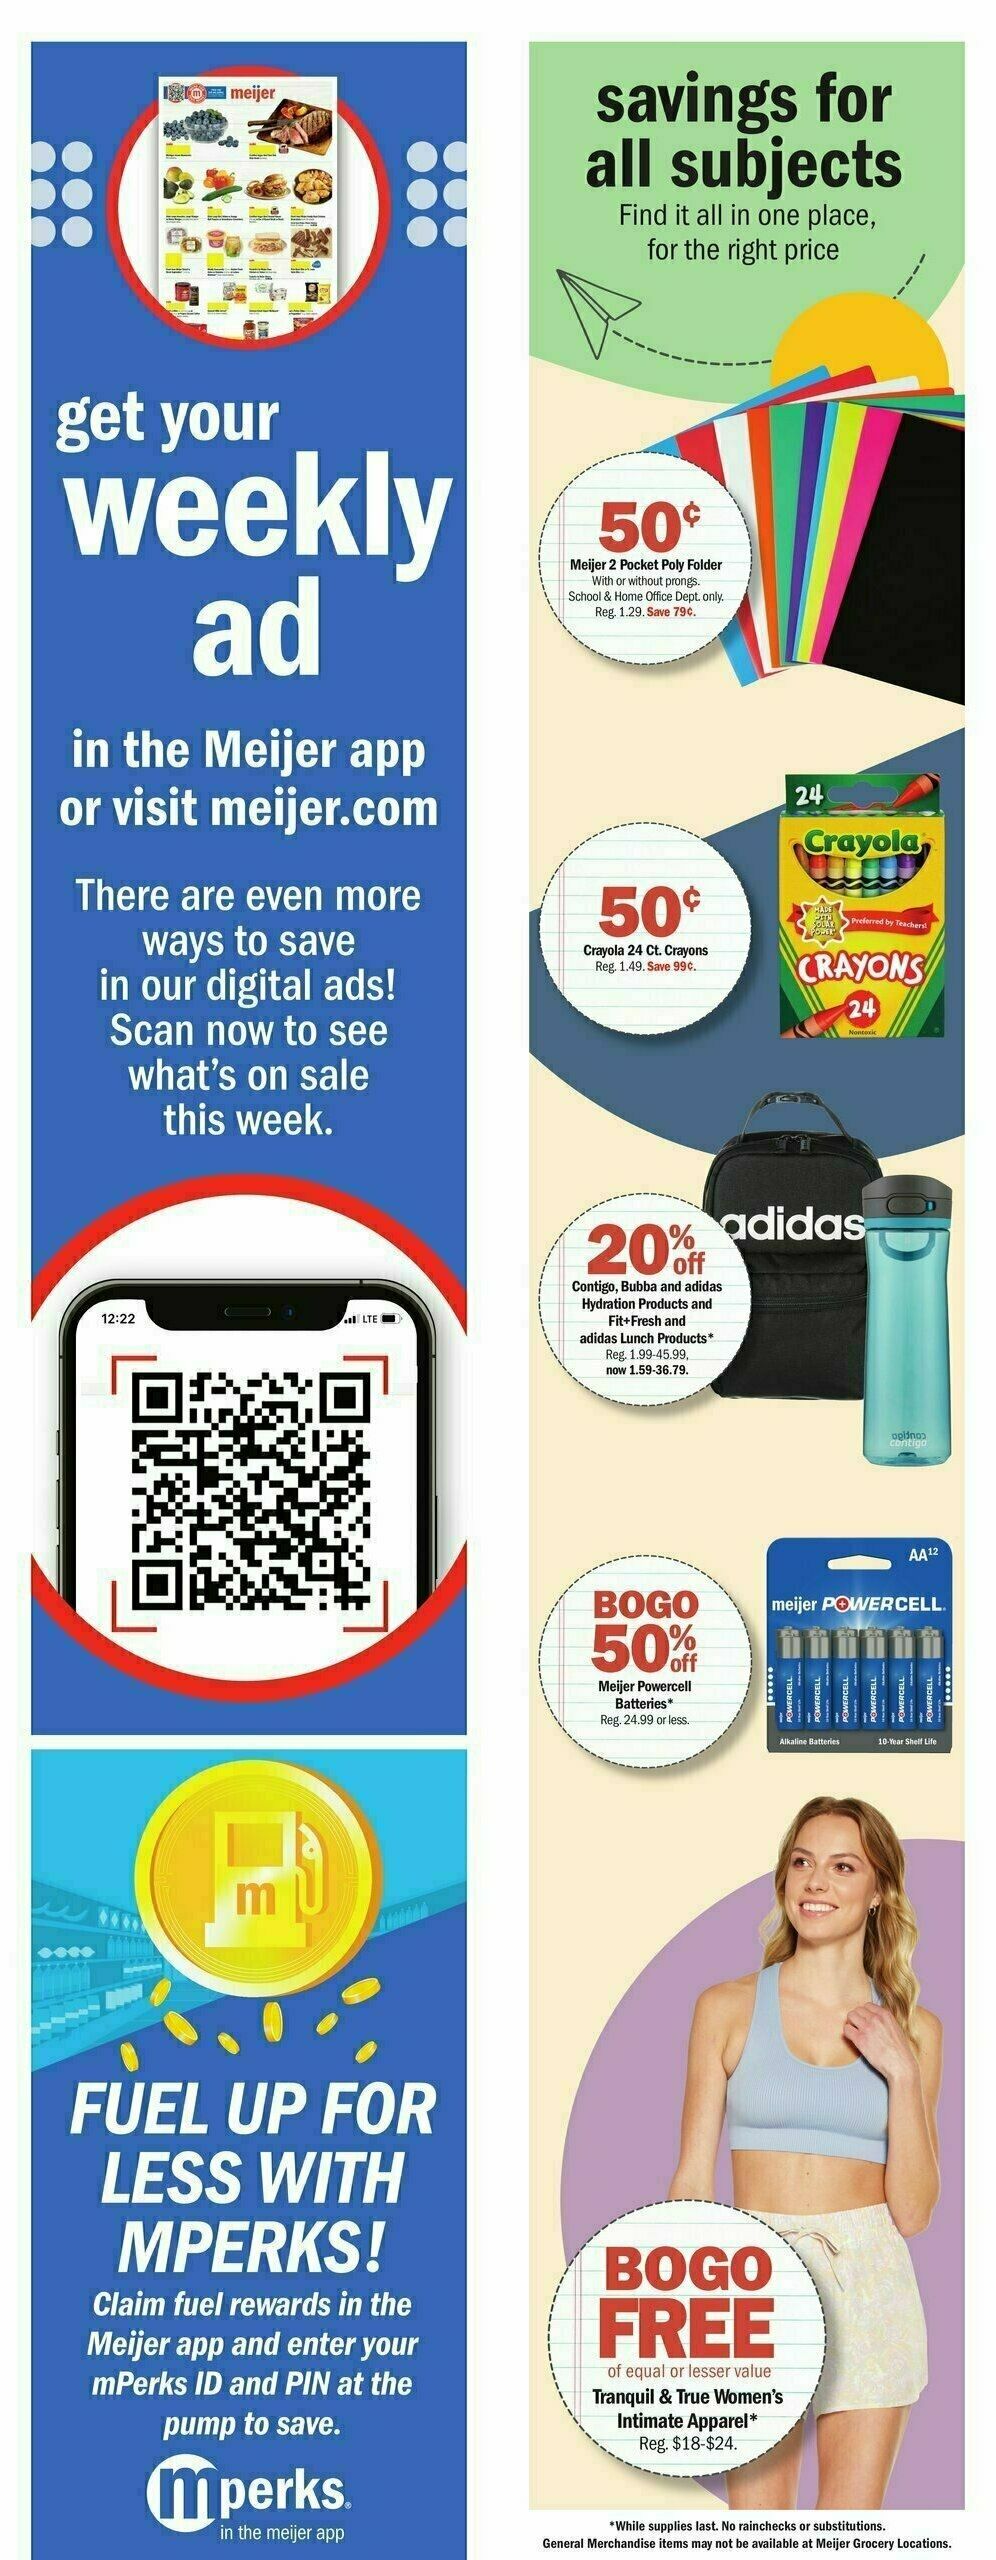 Meijer Weekly Ad from July 30